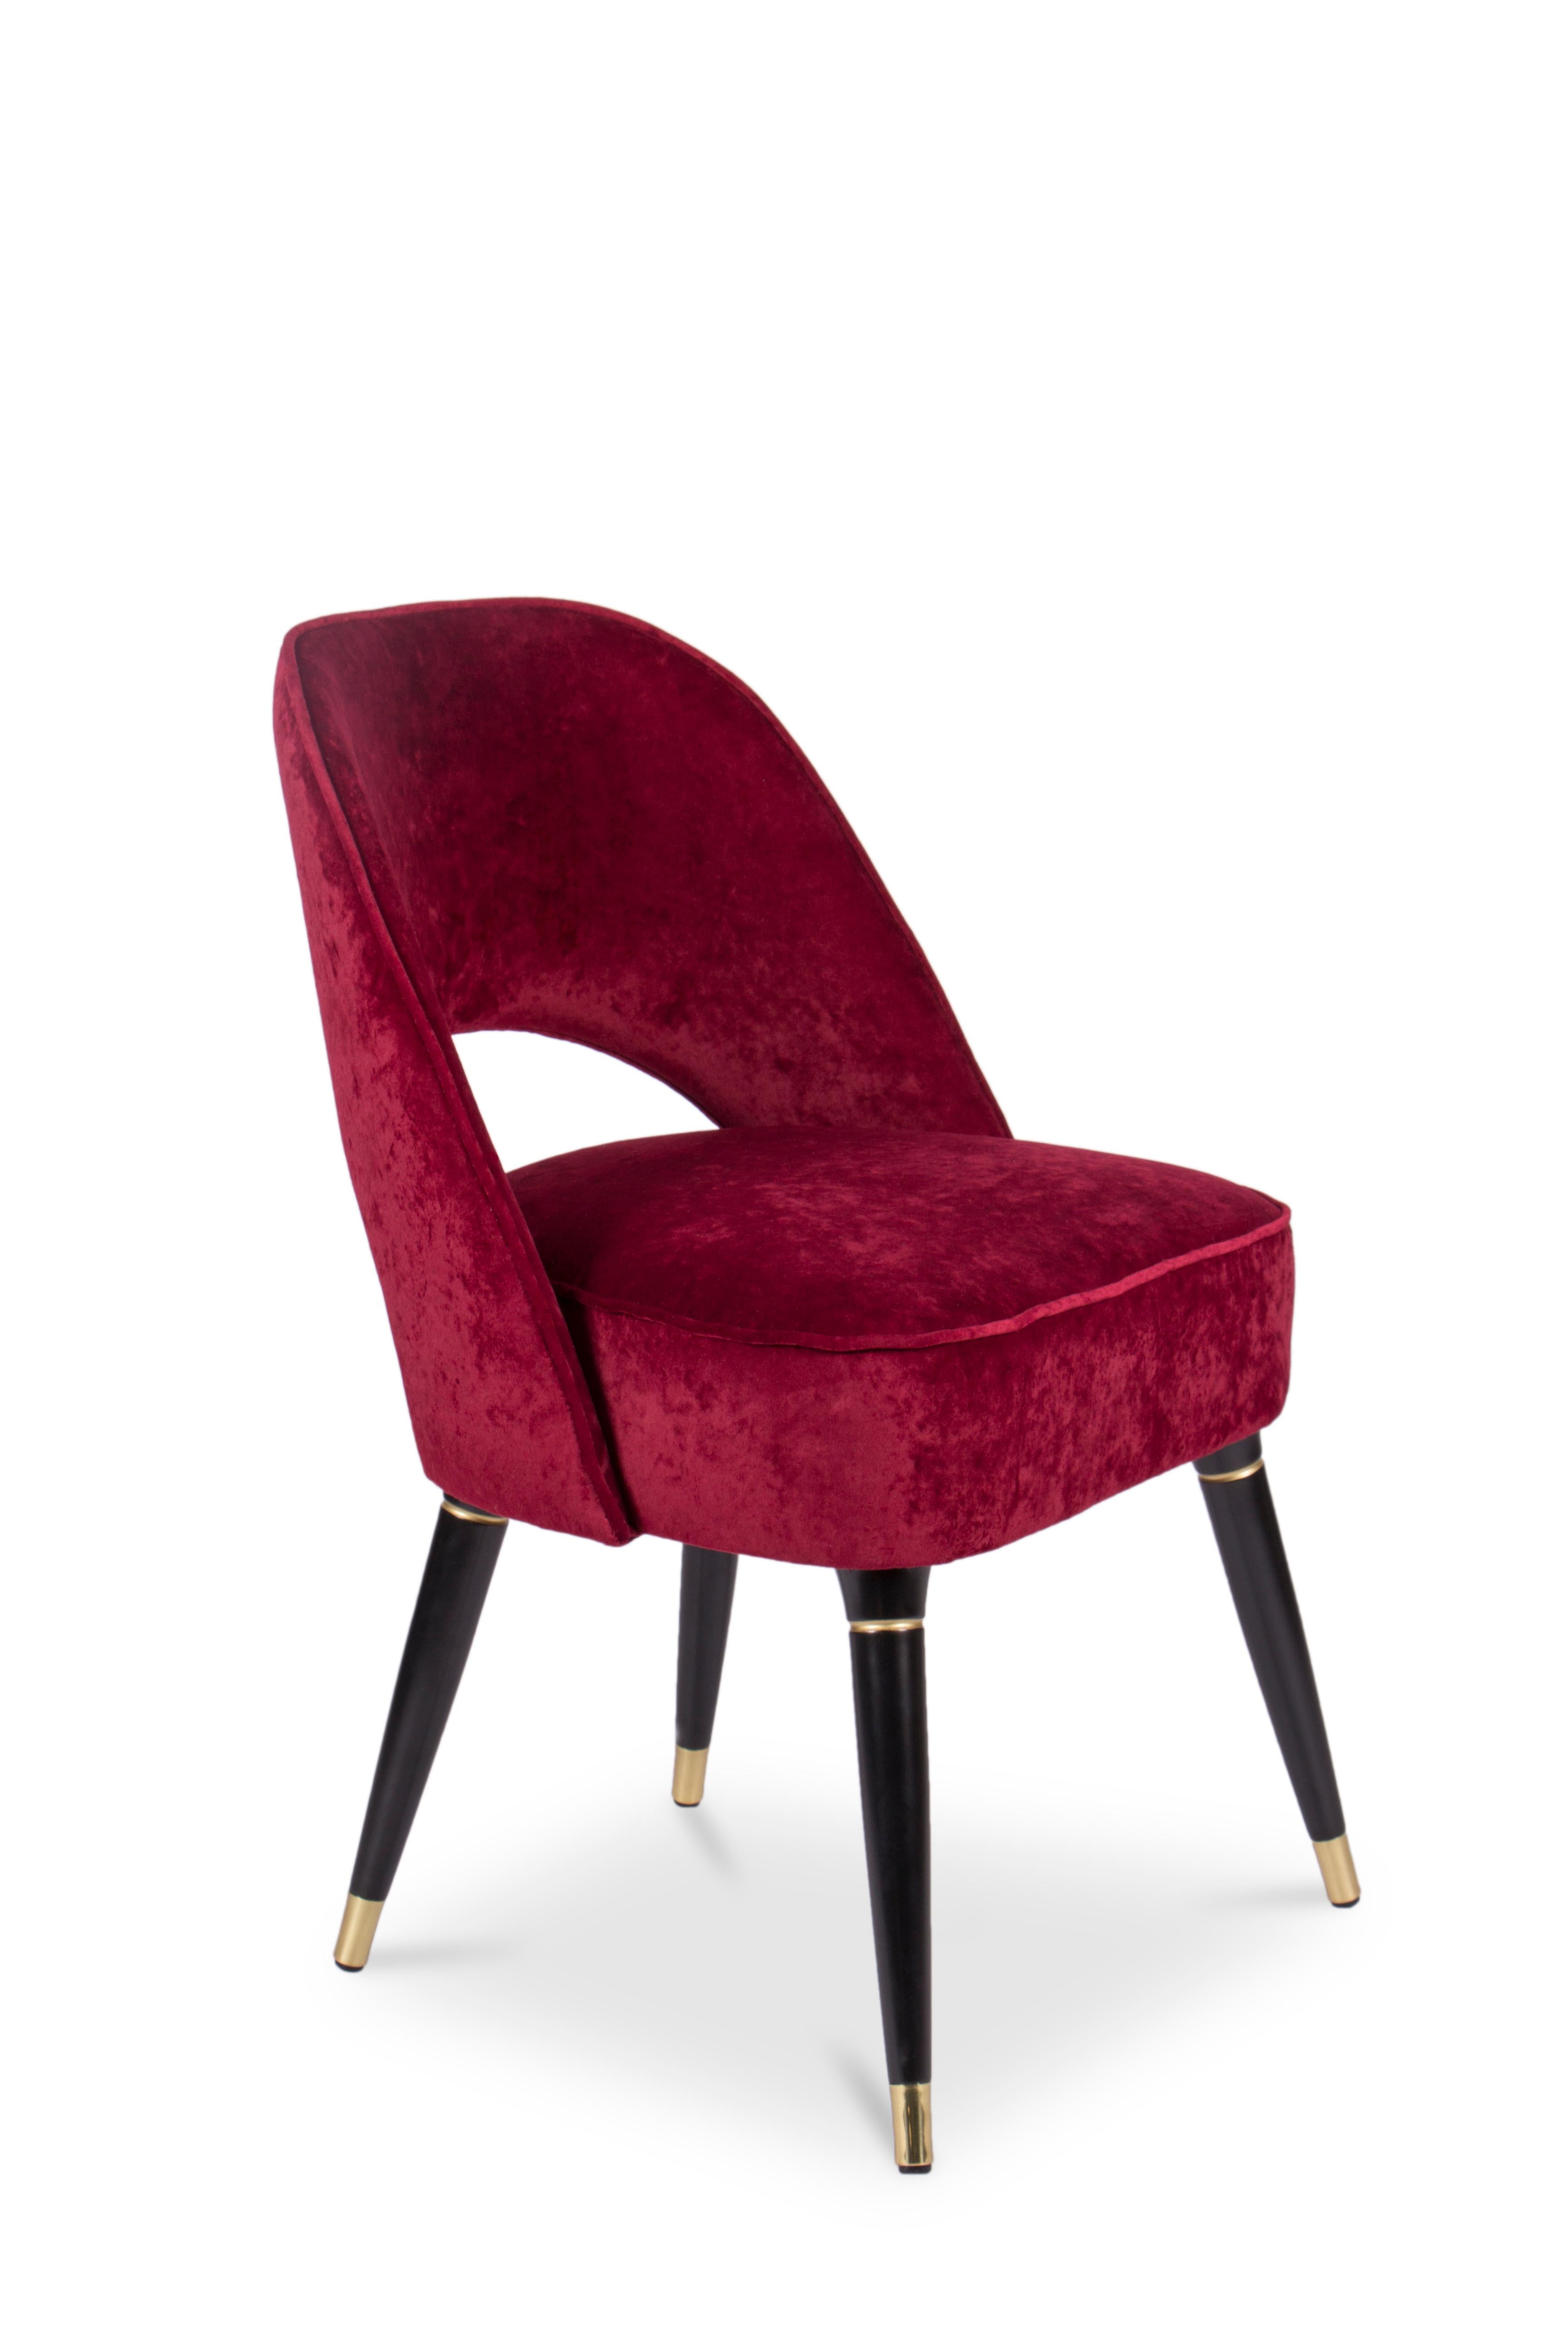 Mid-Century Modern Collins Red Velvet Dining Chair by Essential Home

Mid-Century Modern Collins Red Velvet Dining Chair is upholstered in velvet, supported by tapered glossy black legs with rich accents of polished brass. It has welted stitches on